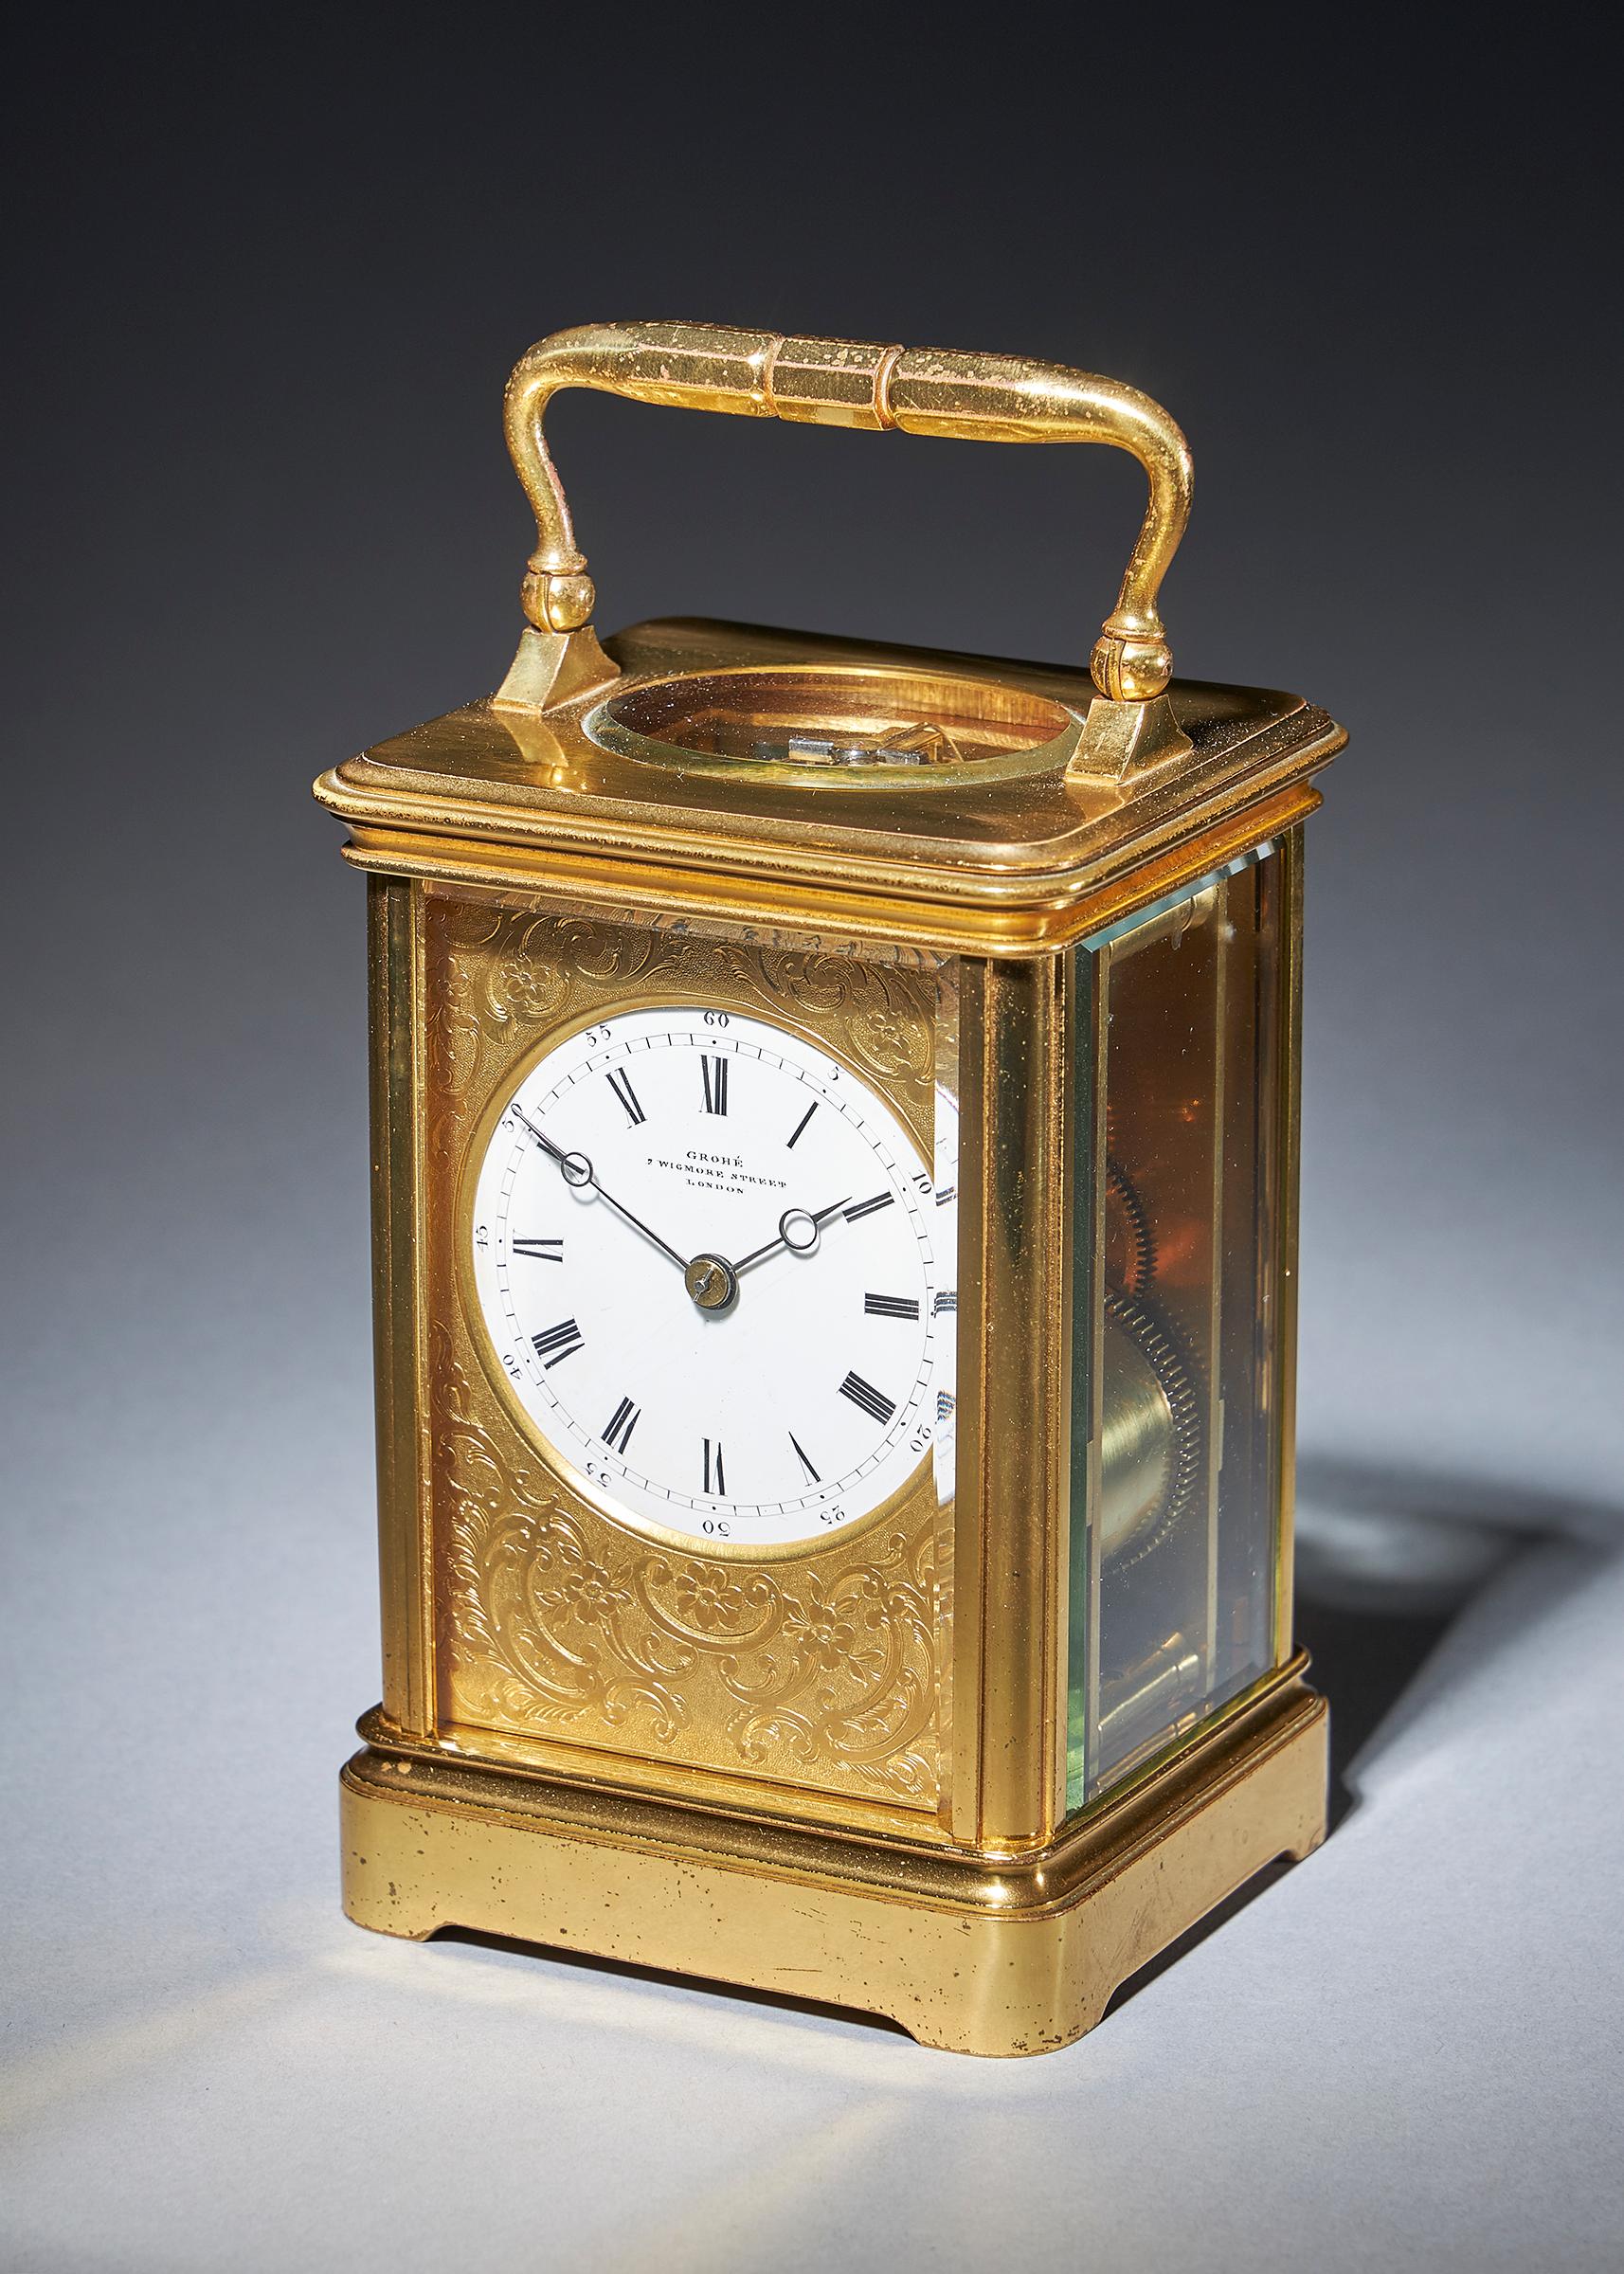 Striking carriage clock with a gilt-brass corniche case by Grohé, circa 1880.

A most attractive eight-day striking carriage clock, signed on the enamel dial GROHÉ 7 WIGMORE STREET LONDON, circa 1870. This is almost certainly a French clock made